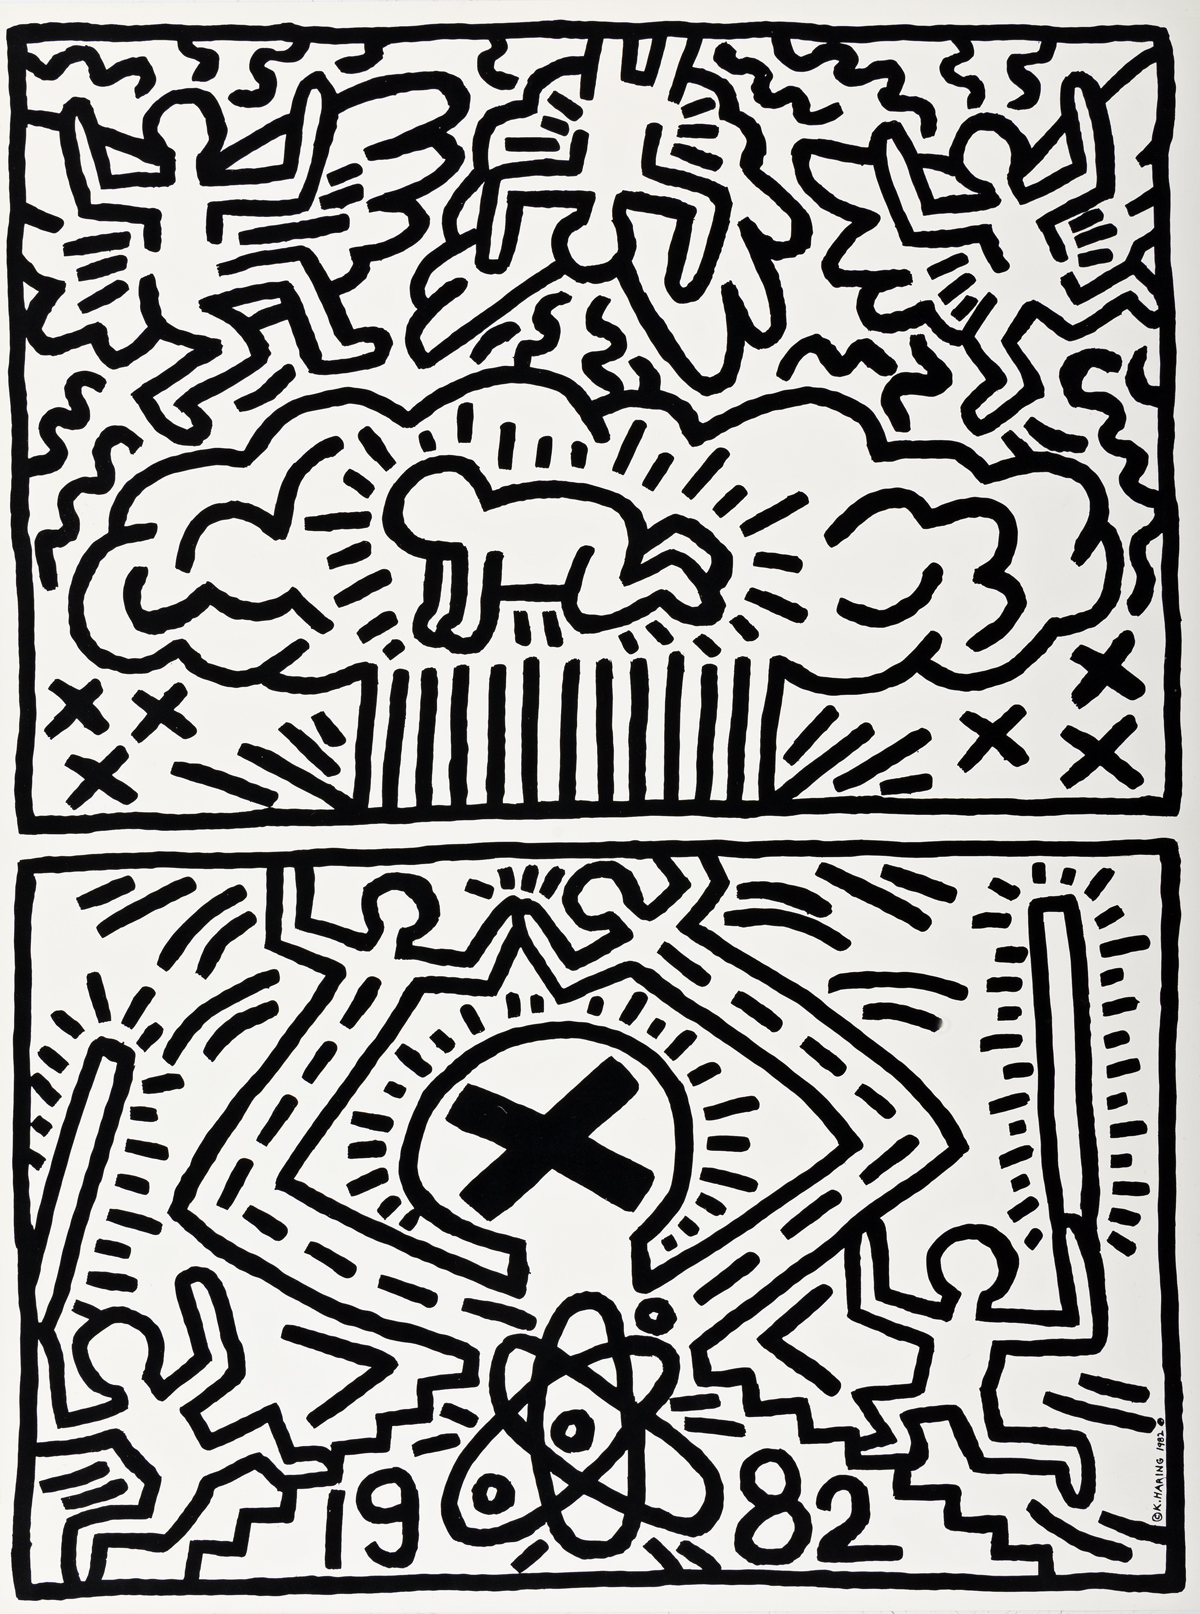 Anti-Nuclear Rally Poster by Keith Haring.